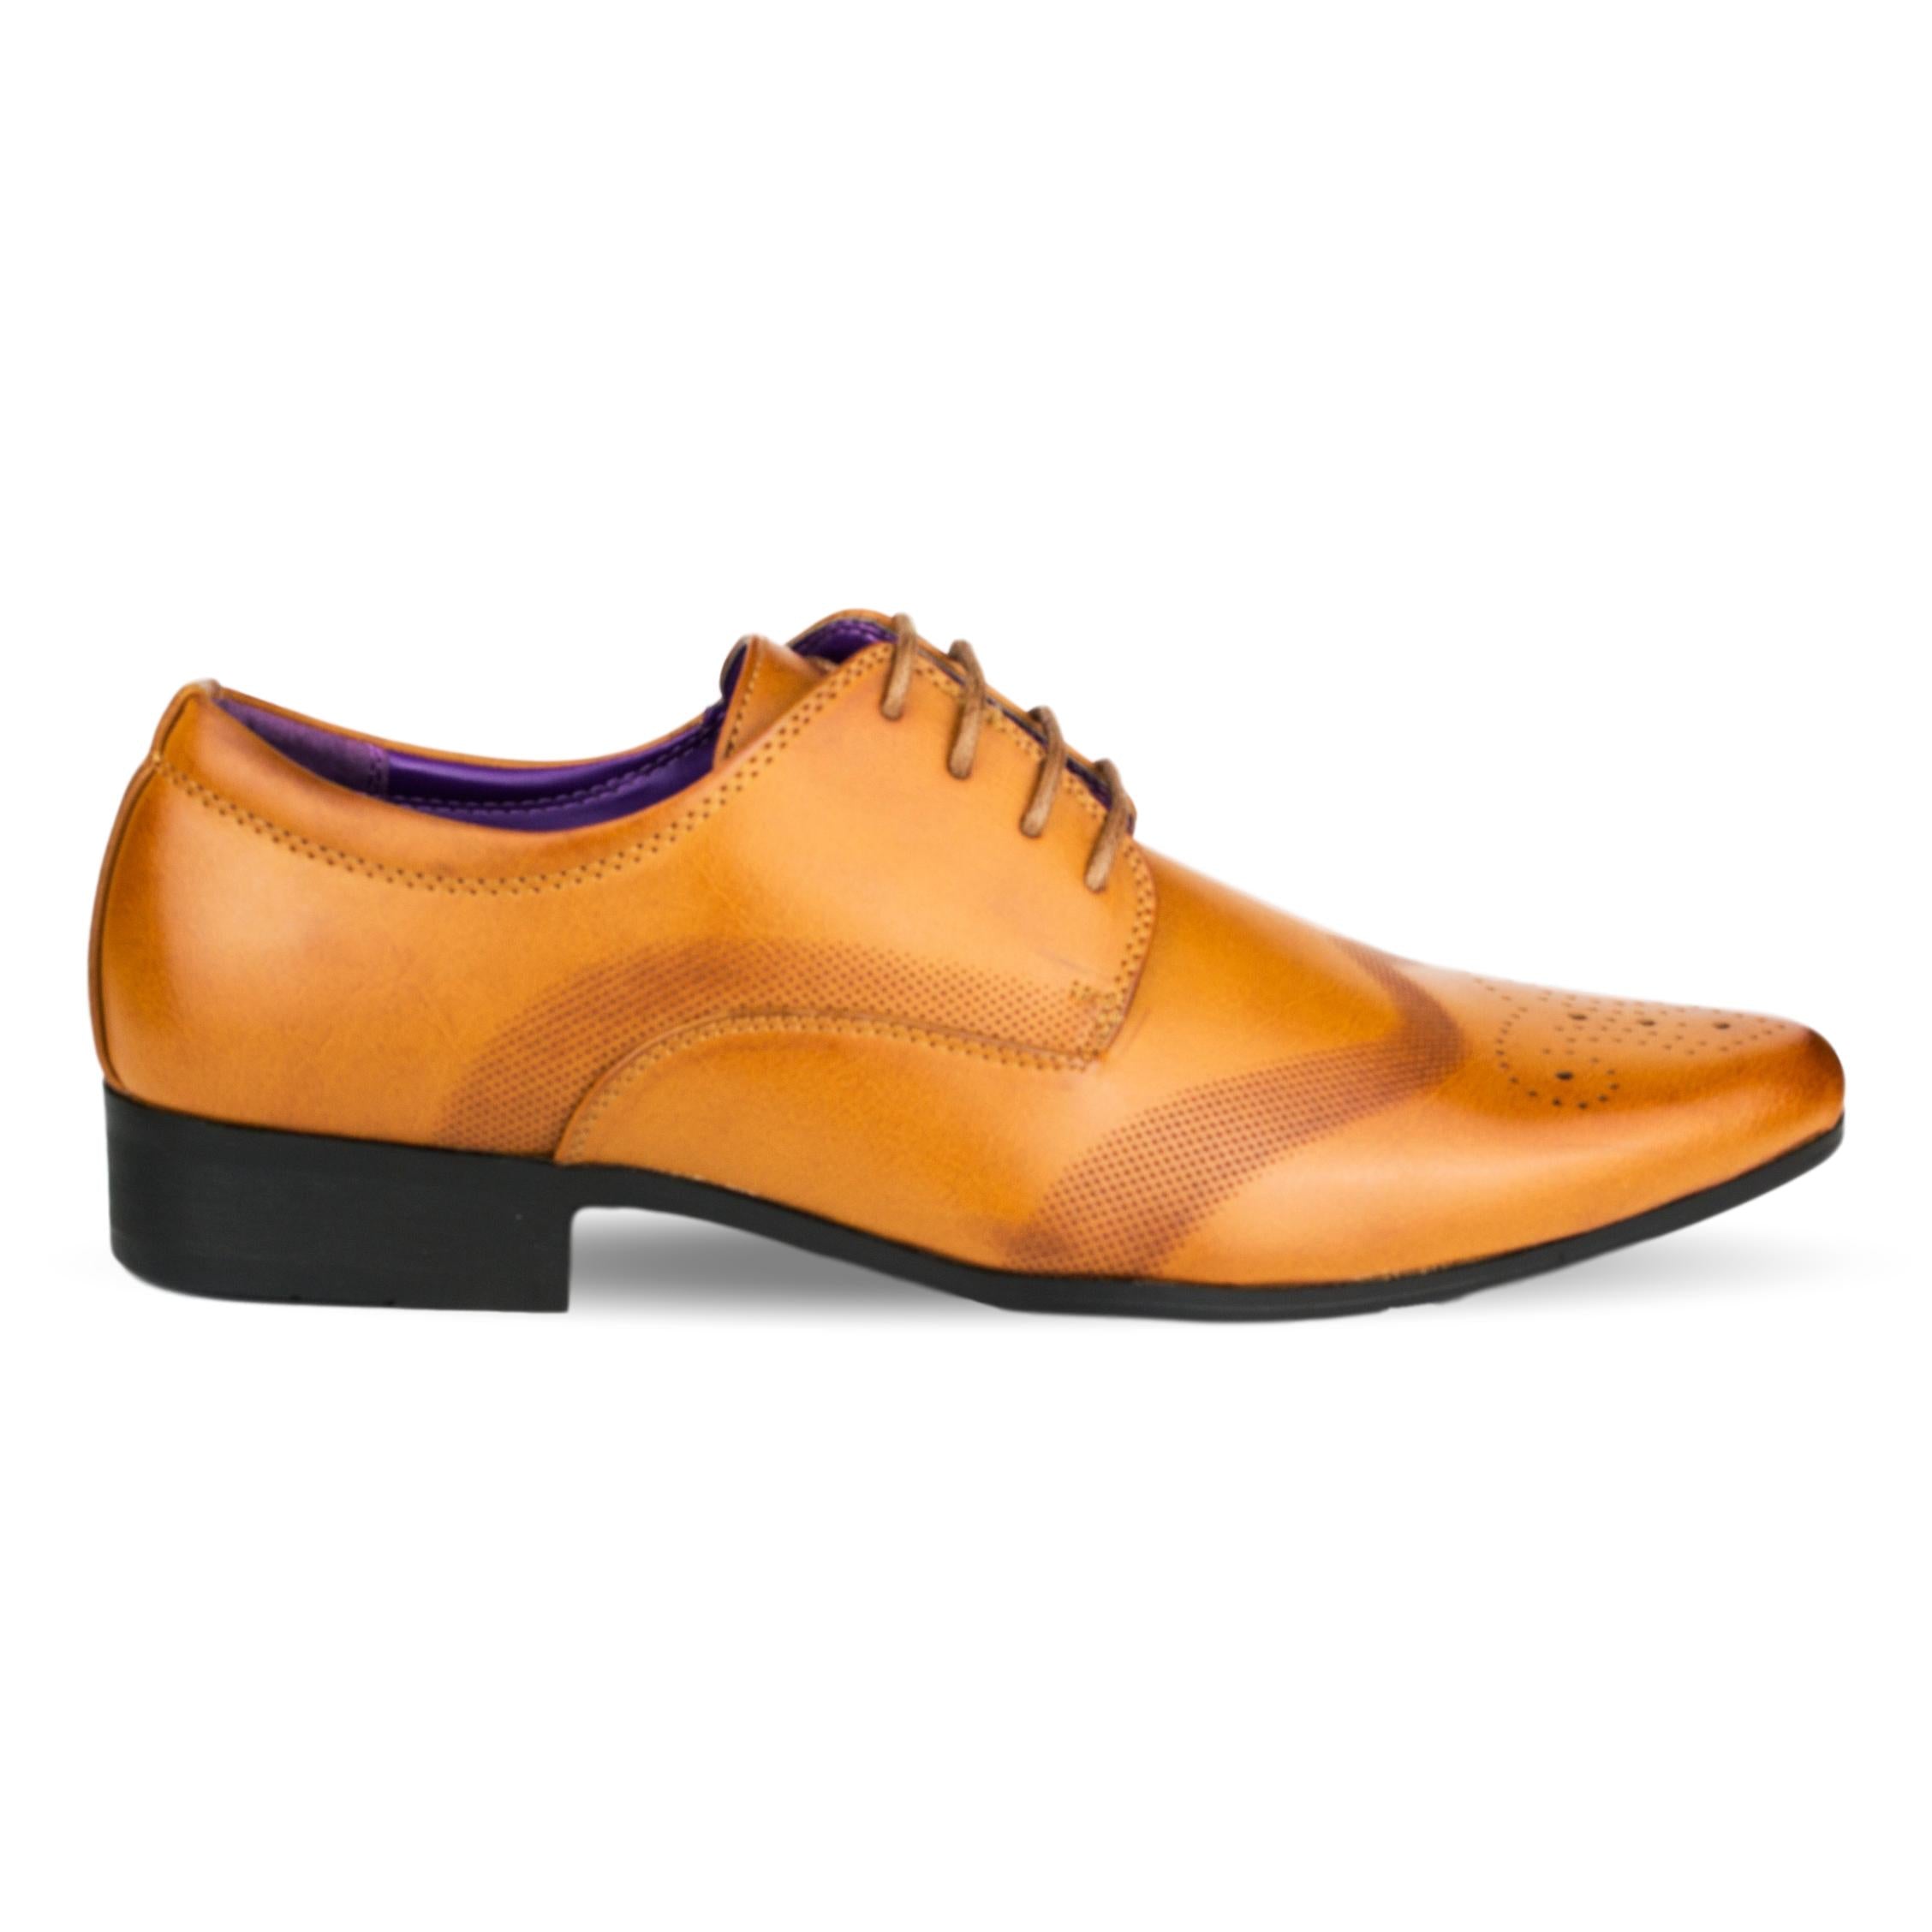 Mens Tan Lace Up Formal Shoe - Watney Shoes 